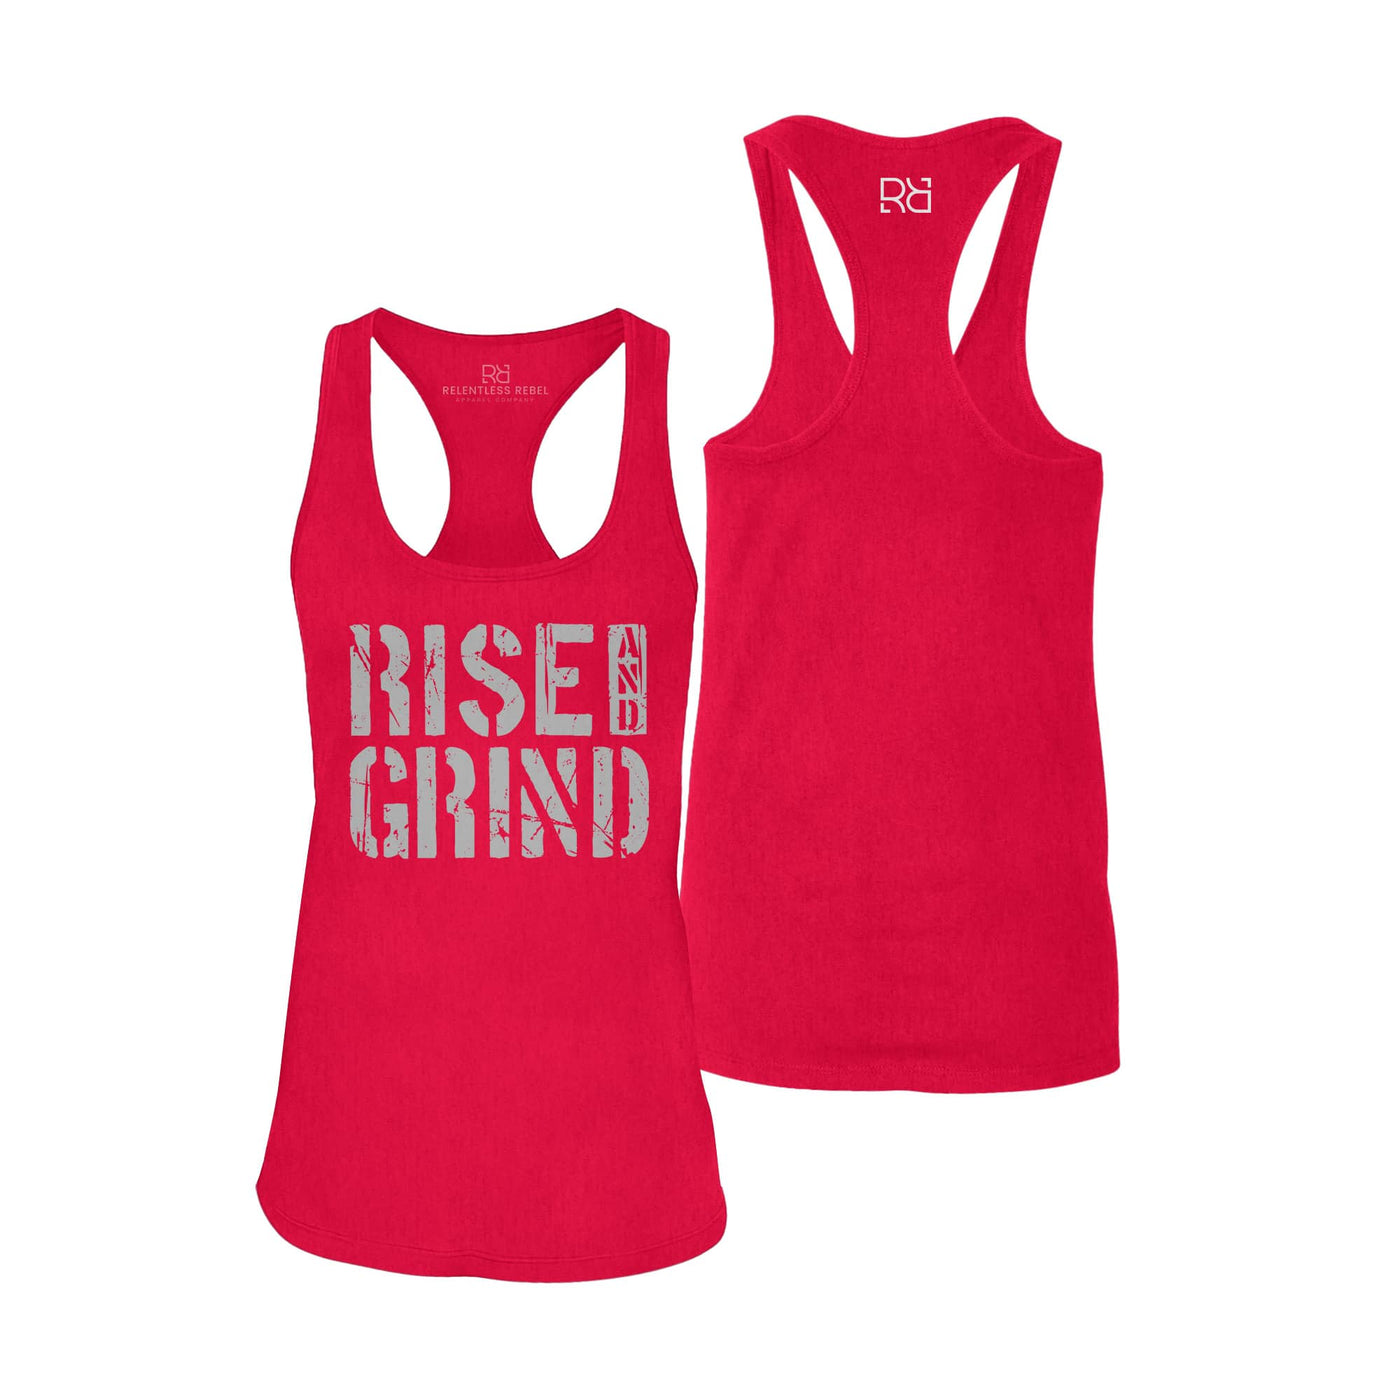 Rise and Grind | Women's Racerback Tank Top